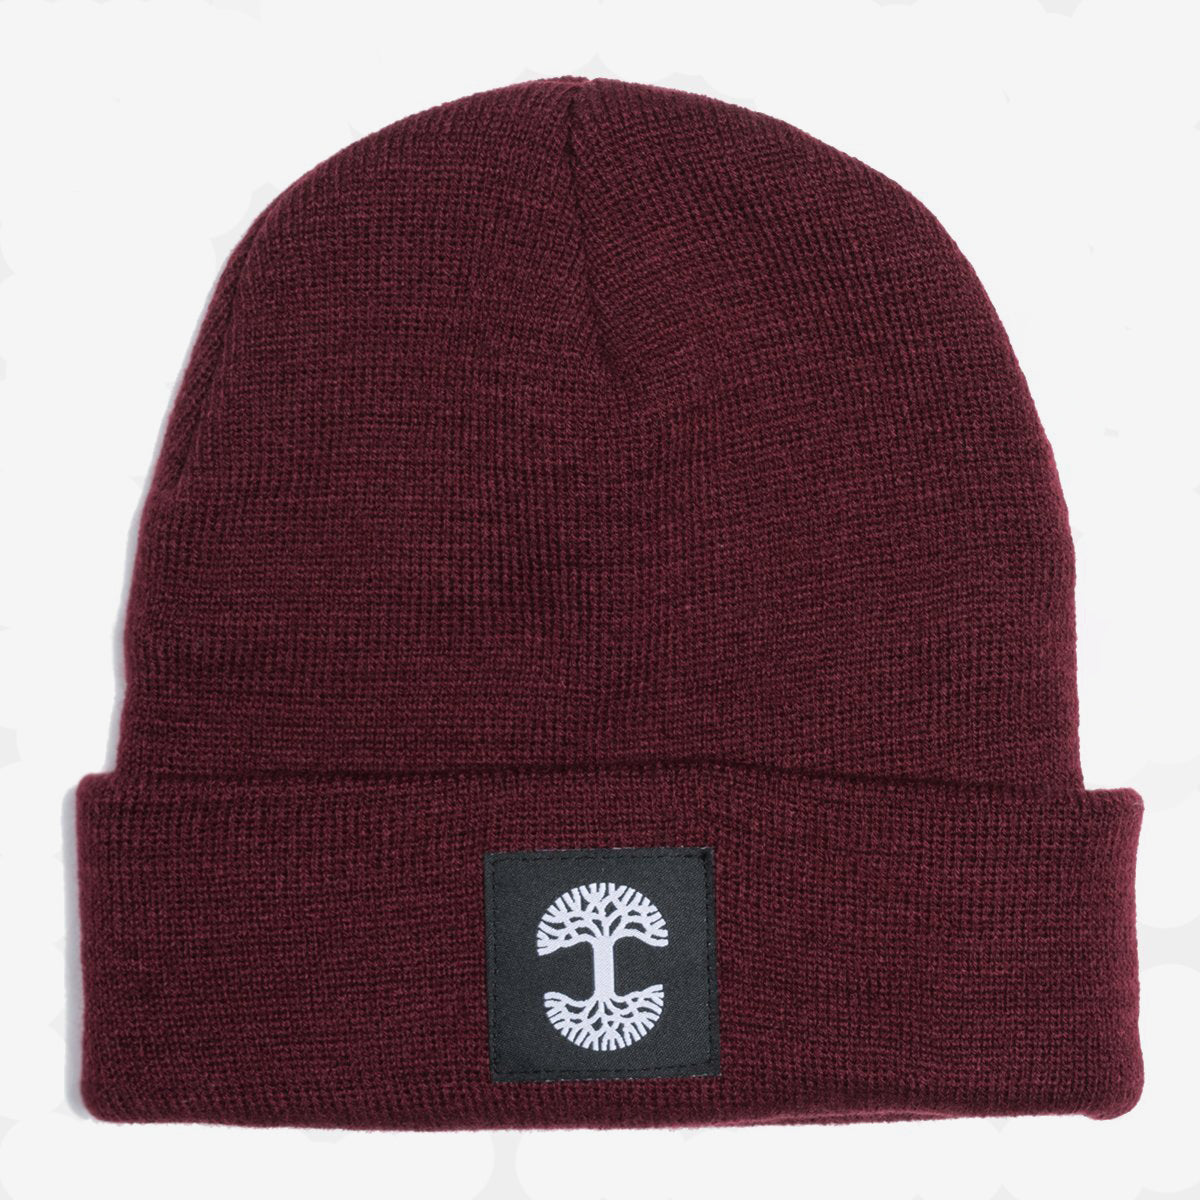 A burgundy woven cuffed beanie with a black and white Oaklandish logo tag on the cuff.